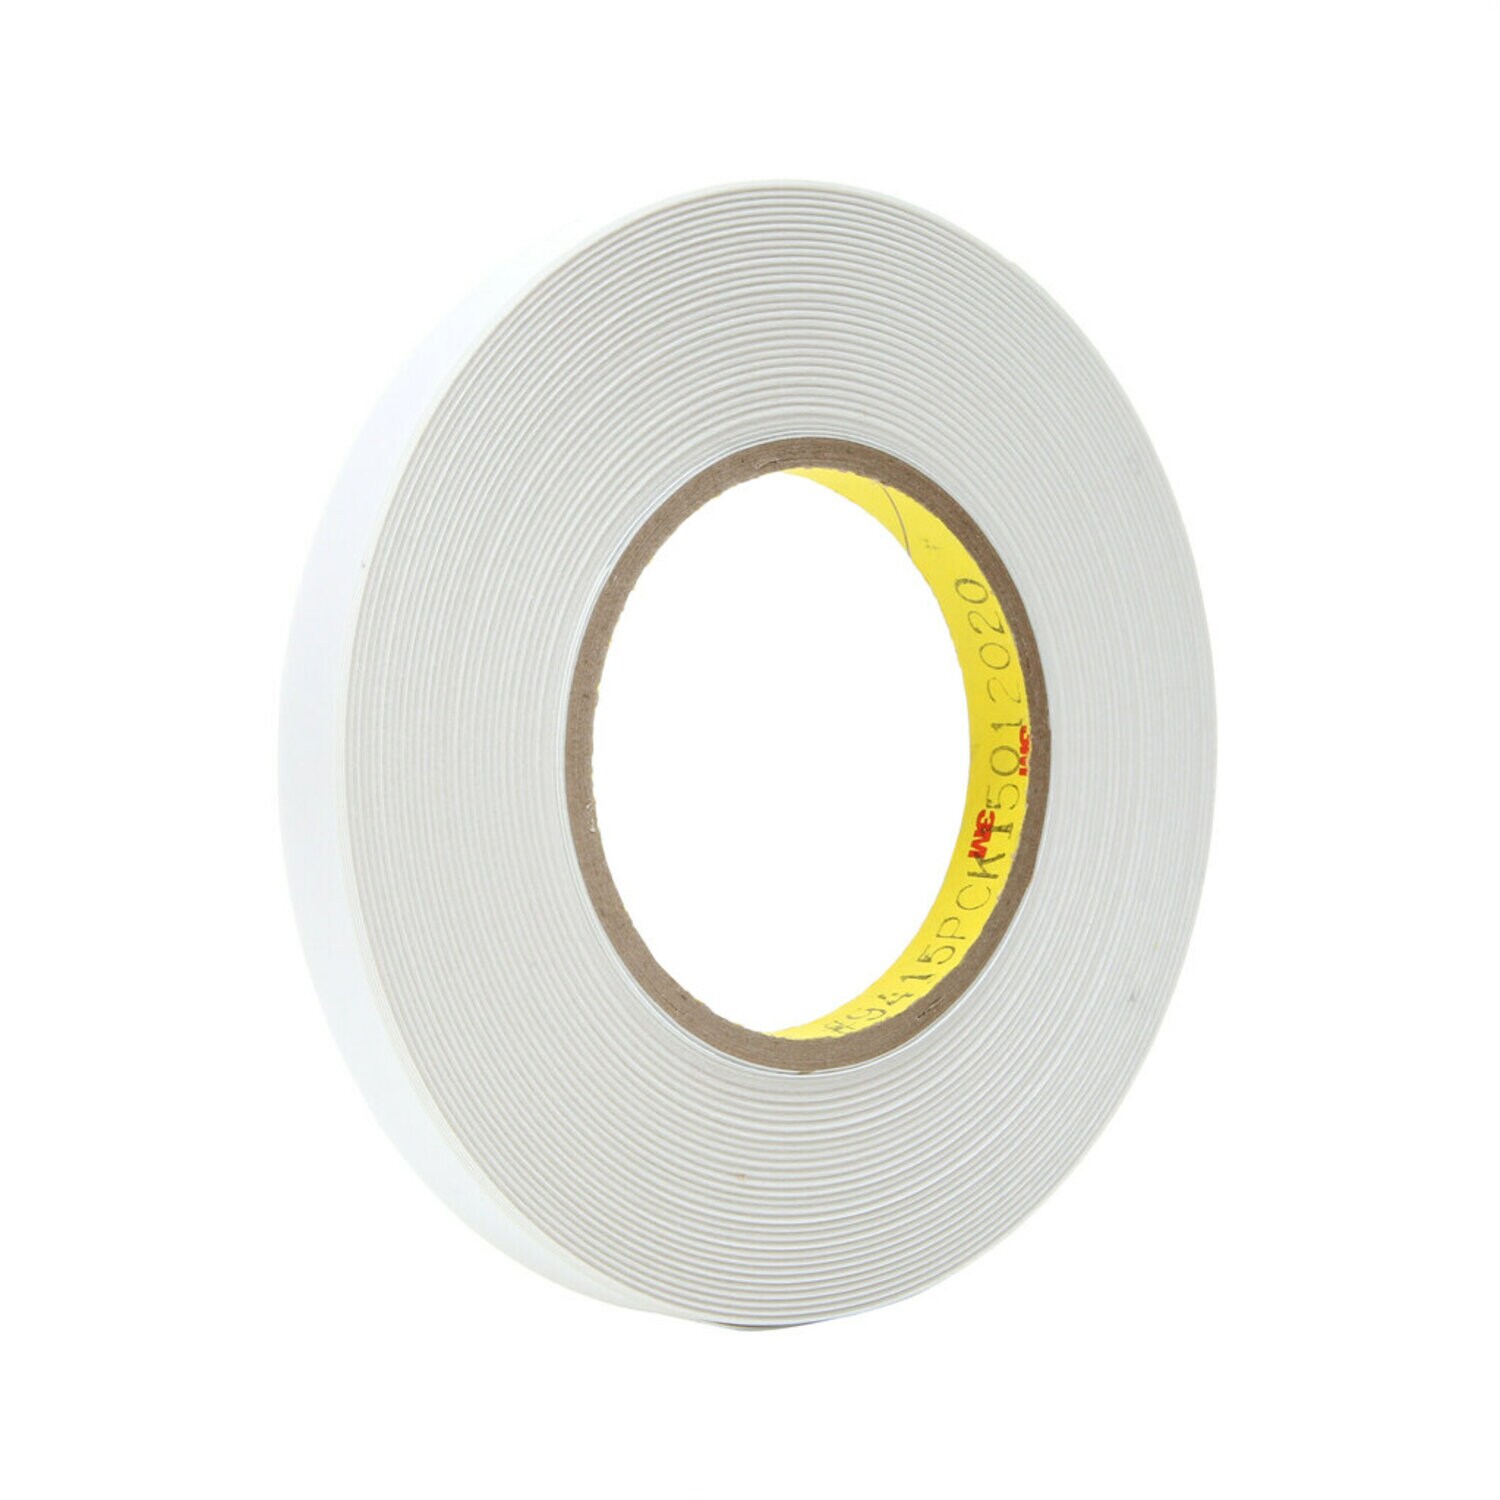 7100179382 - 3M Removable Repositionable Tape 9415PC, Clear, 1/4 in x 72 yd, 2 mil,
144 Rolls/Case